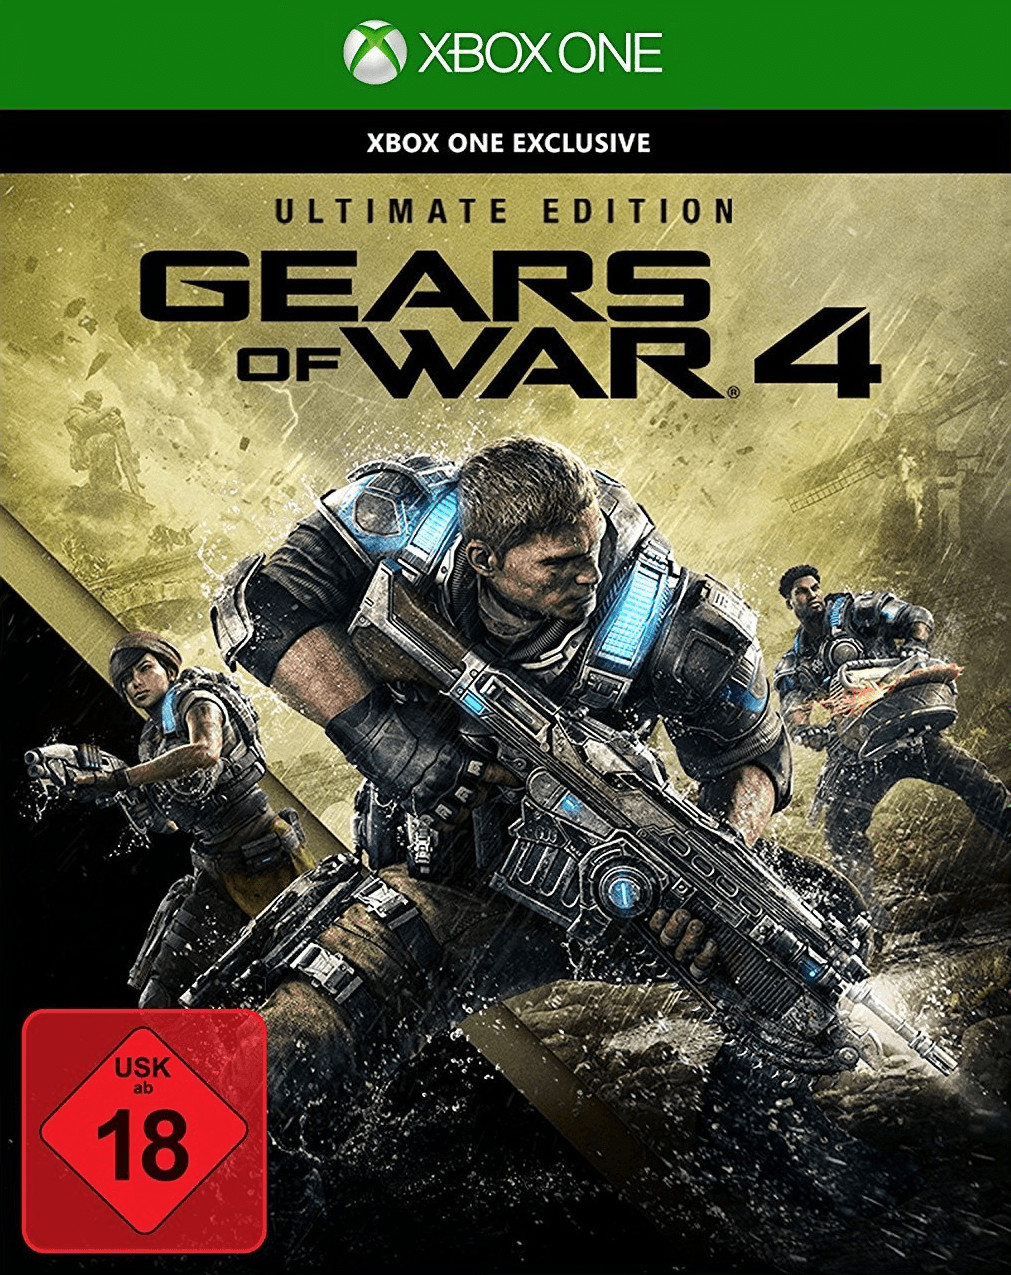 xbox one gears of war 4 edition download free